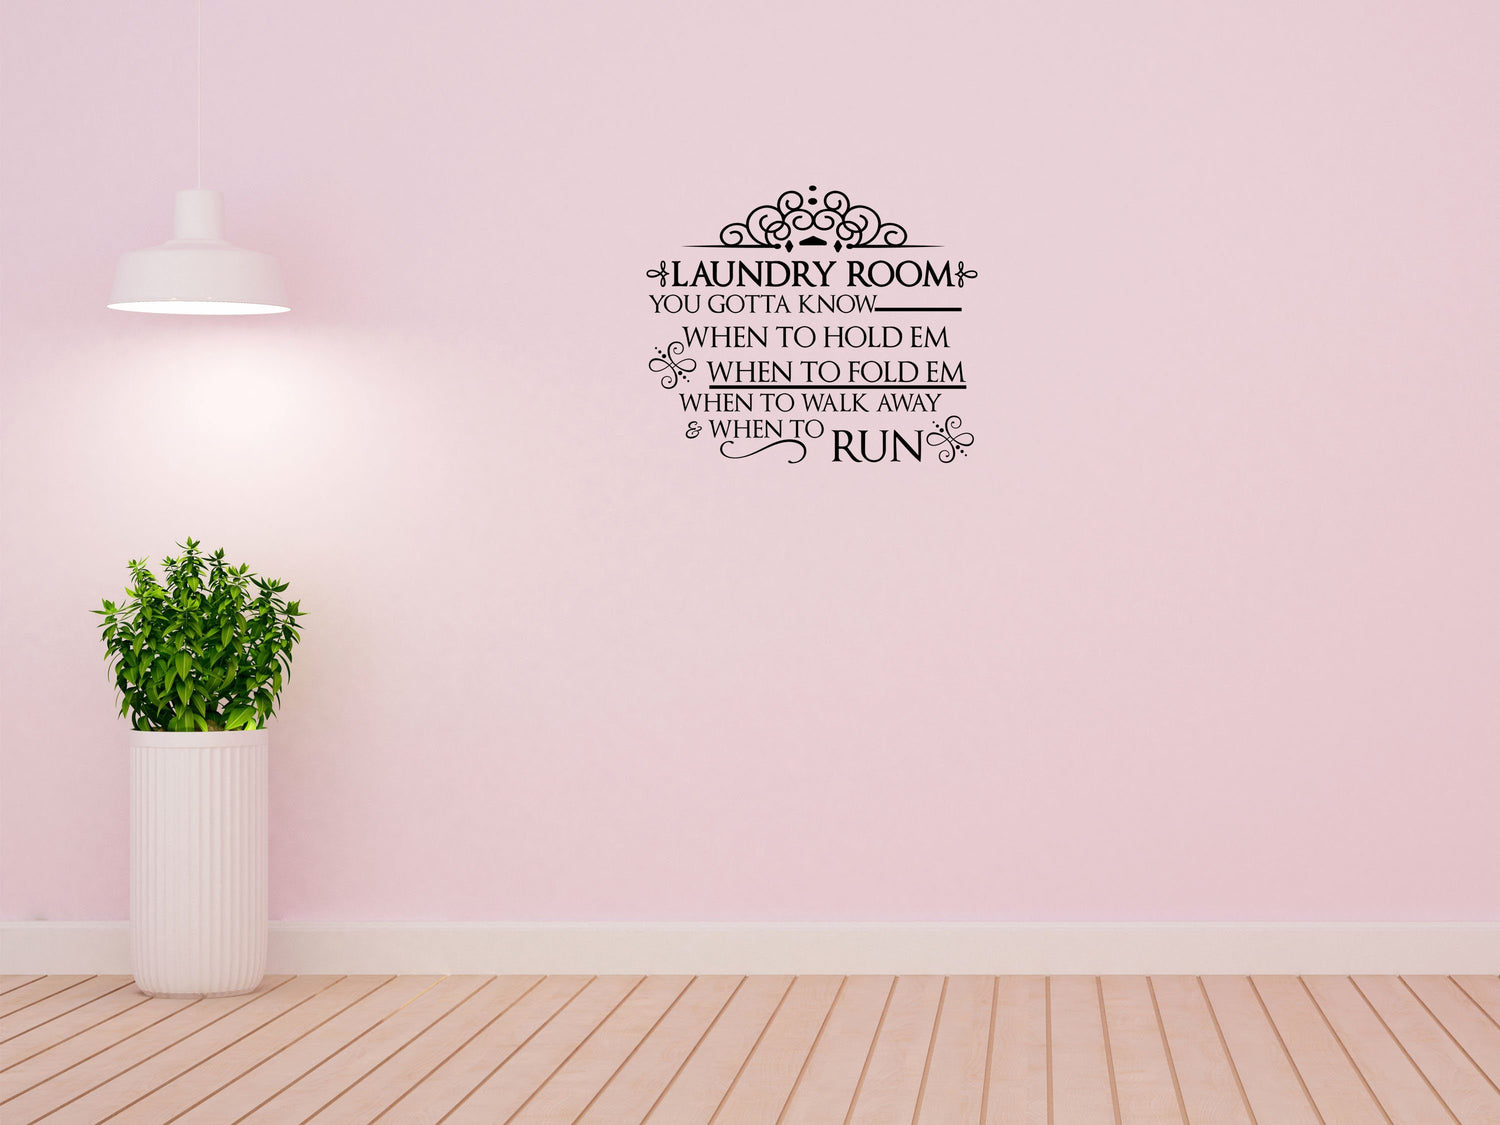 Laundry Room Decal - Inspirational Wall Decals Vinyl Wall Decal Done 